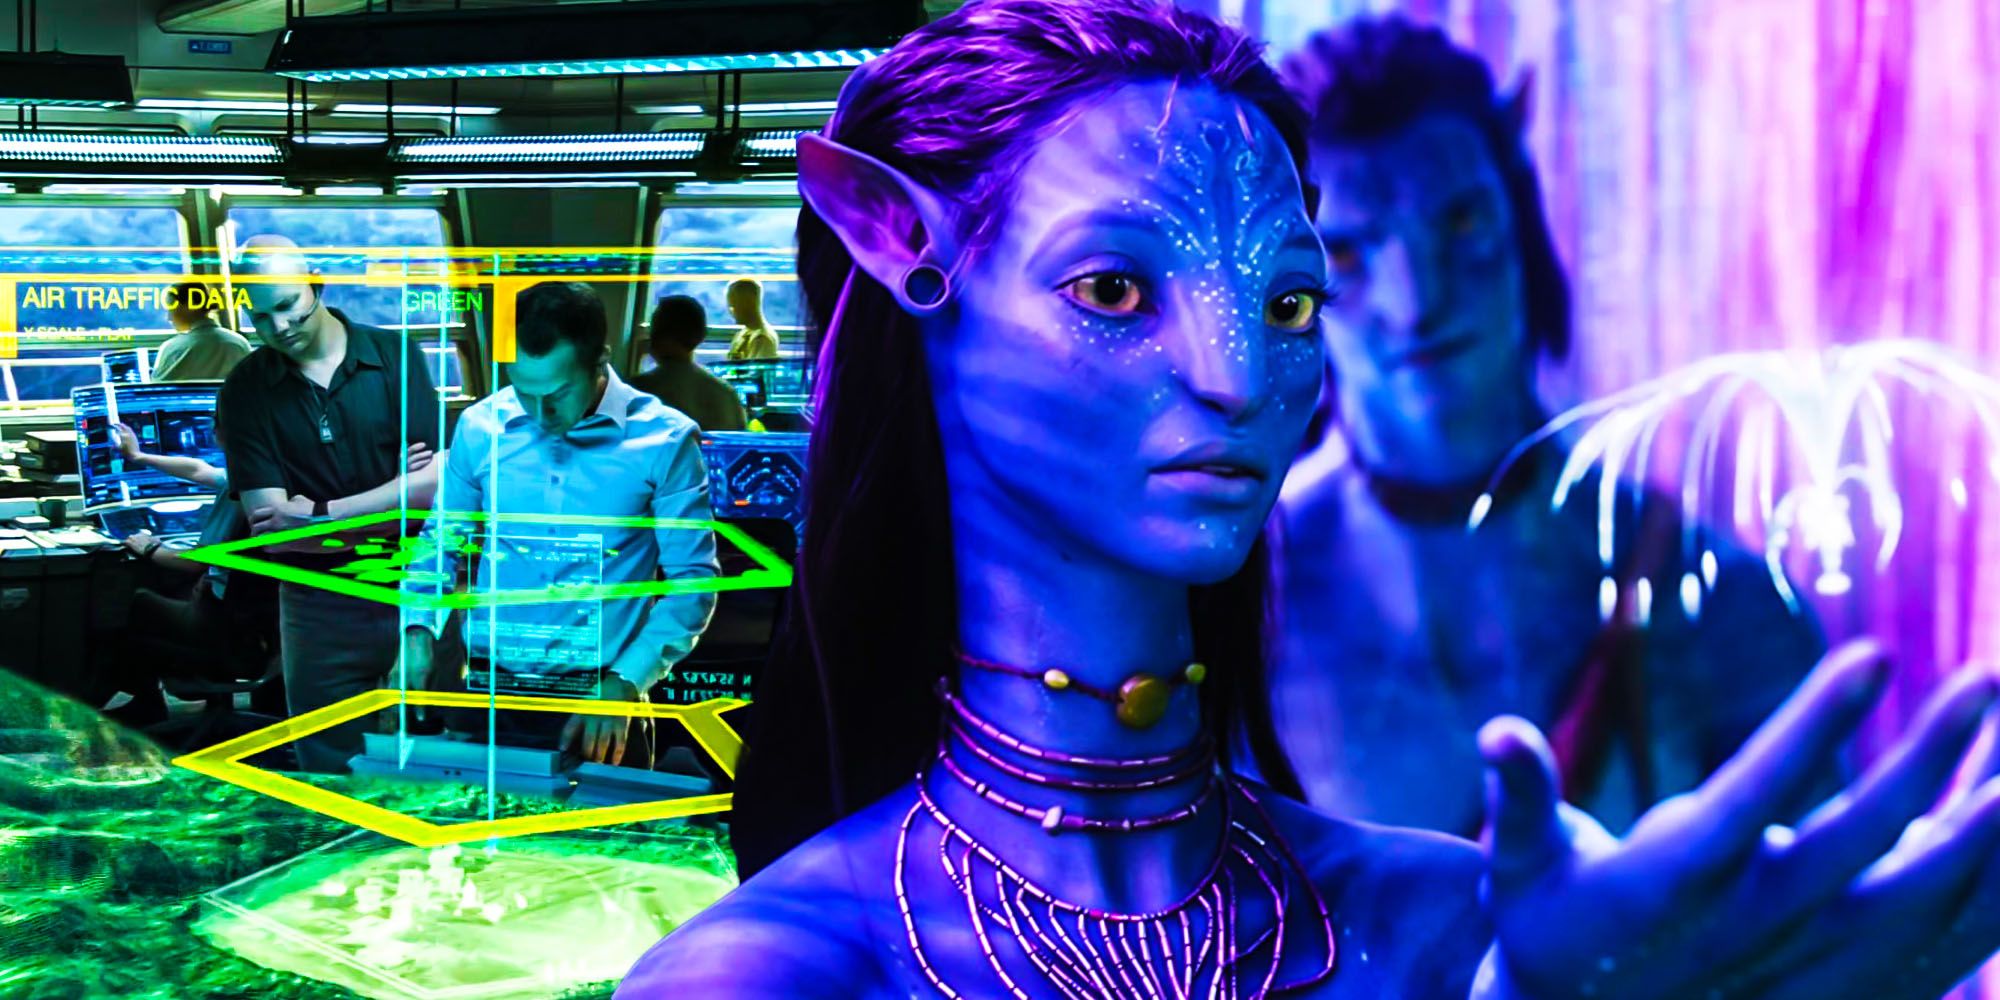 Avatar 2 Has Already Lost Sight Of A Key Element From The First Movie